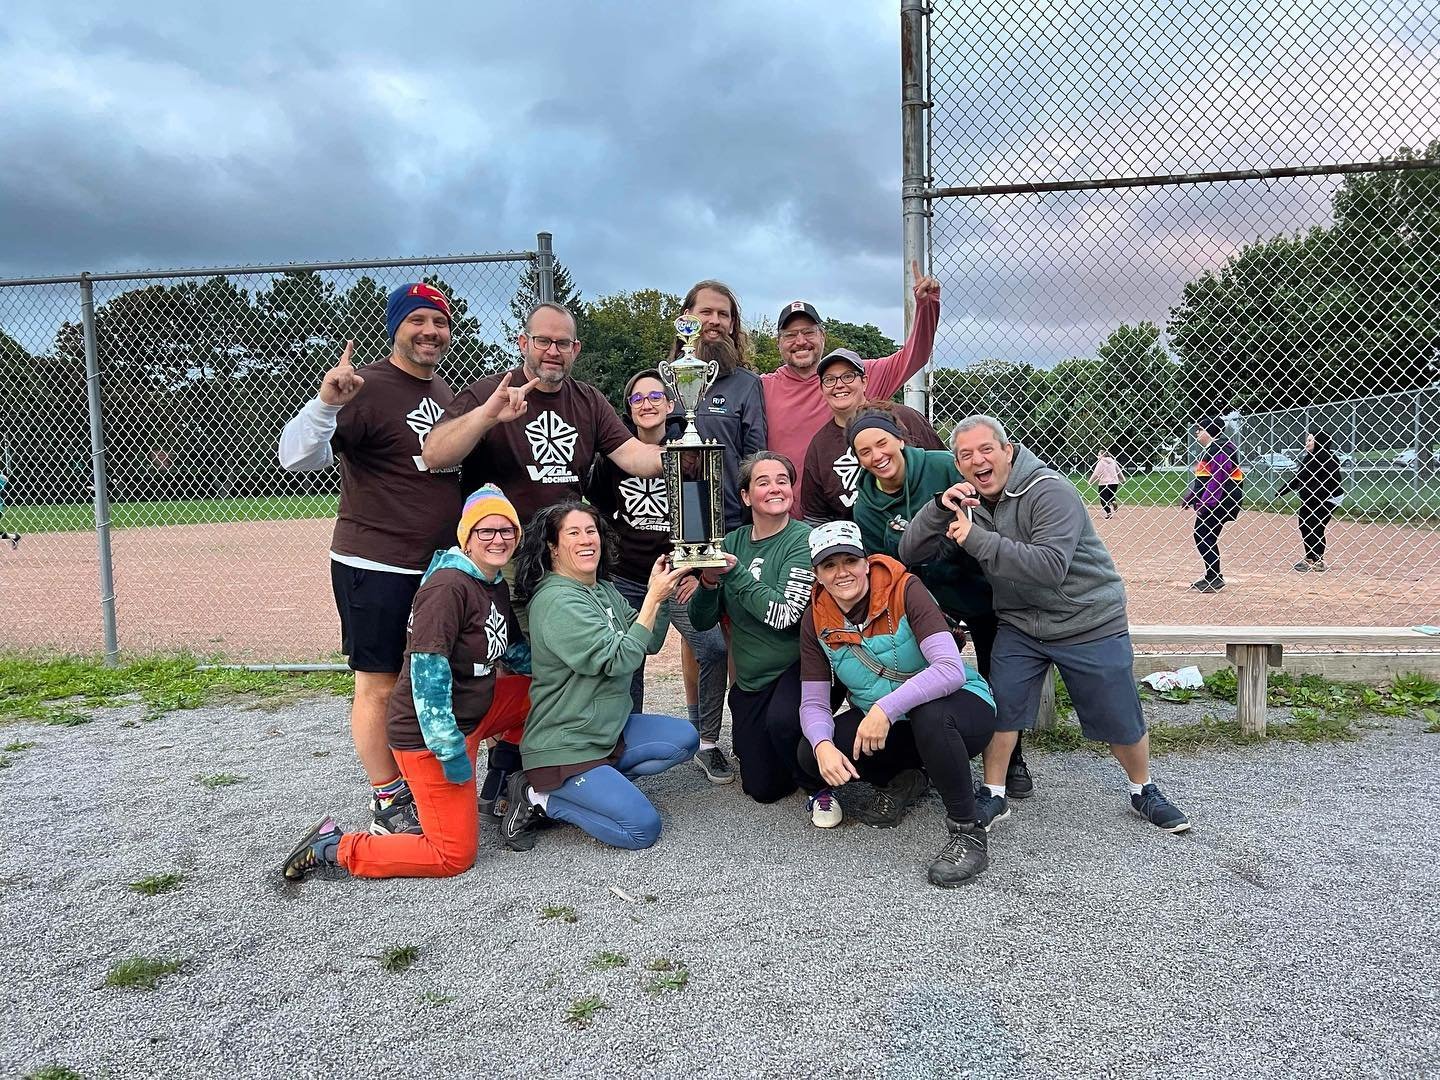 A big congrats to our Summer Kickball champions - Kicking It Old School! Great job this season. Stay tuned for future inclusive sport offerings

#outloudsports #queersports #queerkickball